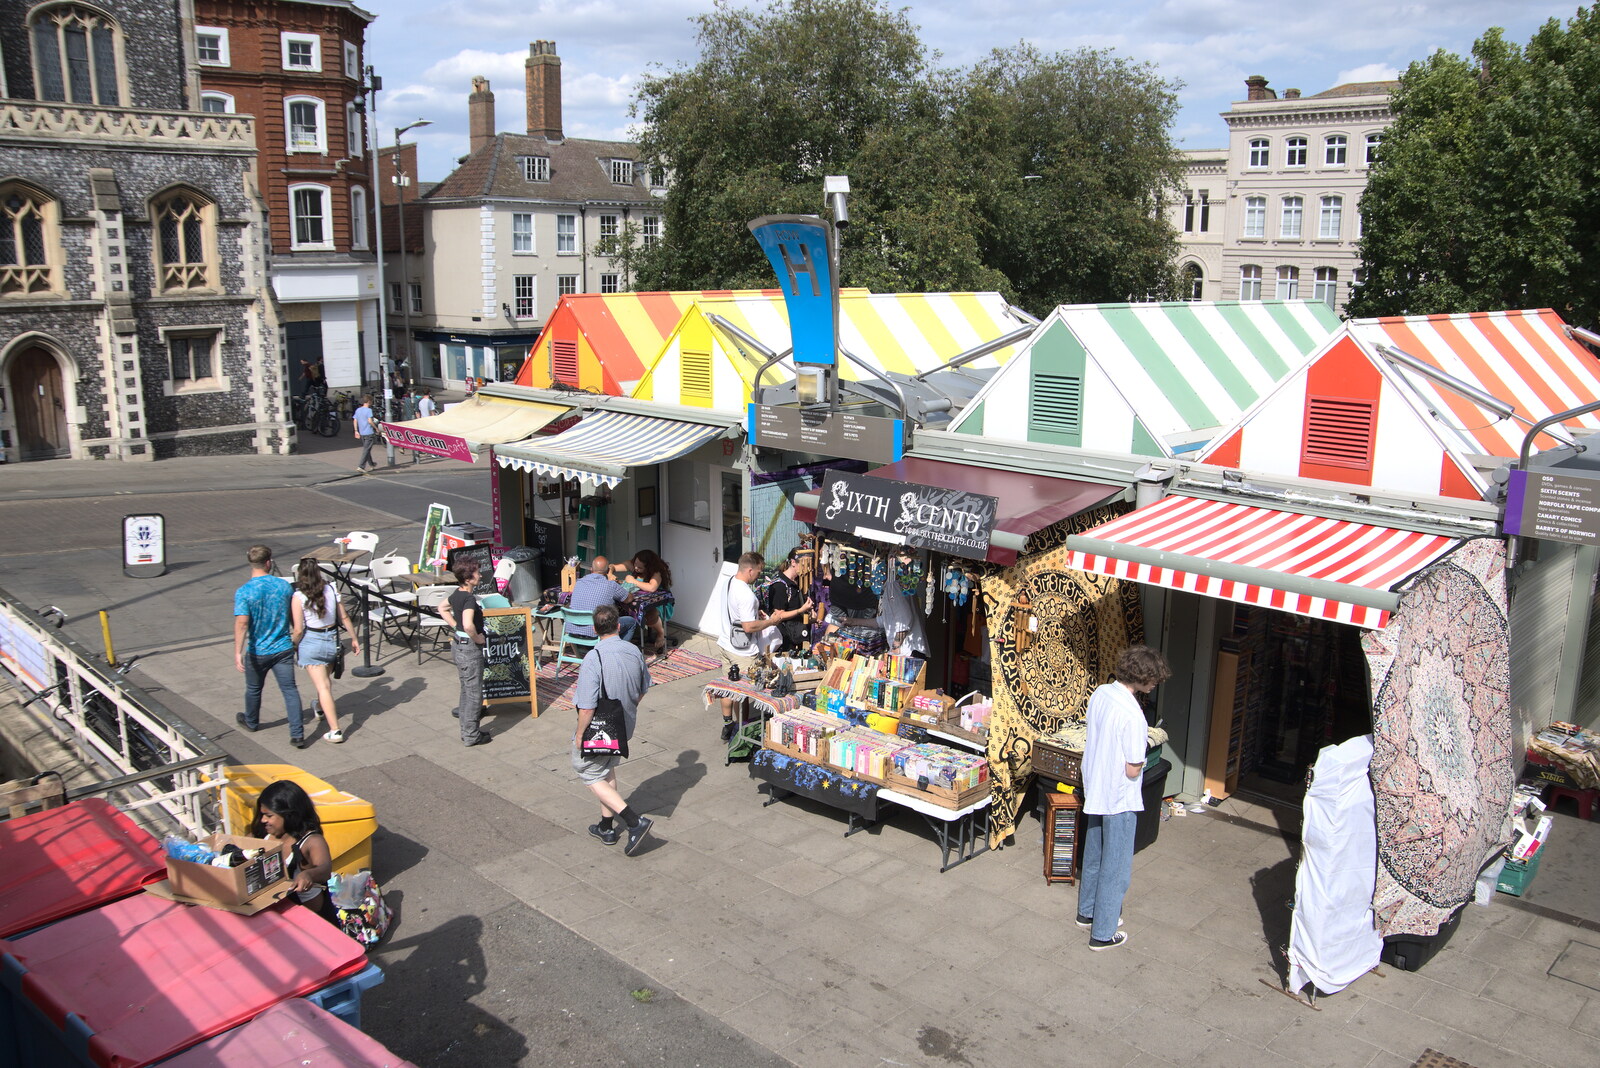 A July Miscellany, Diss, Eye and Norwich - 23rd July 2022: Norwich market